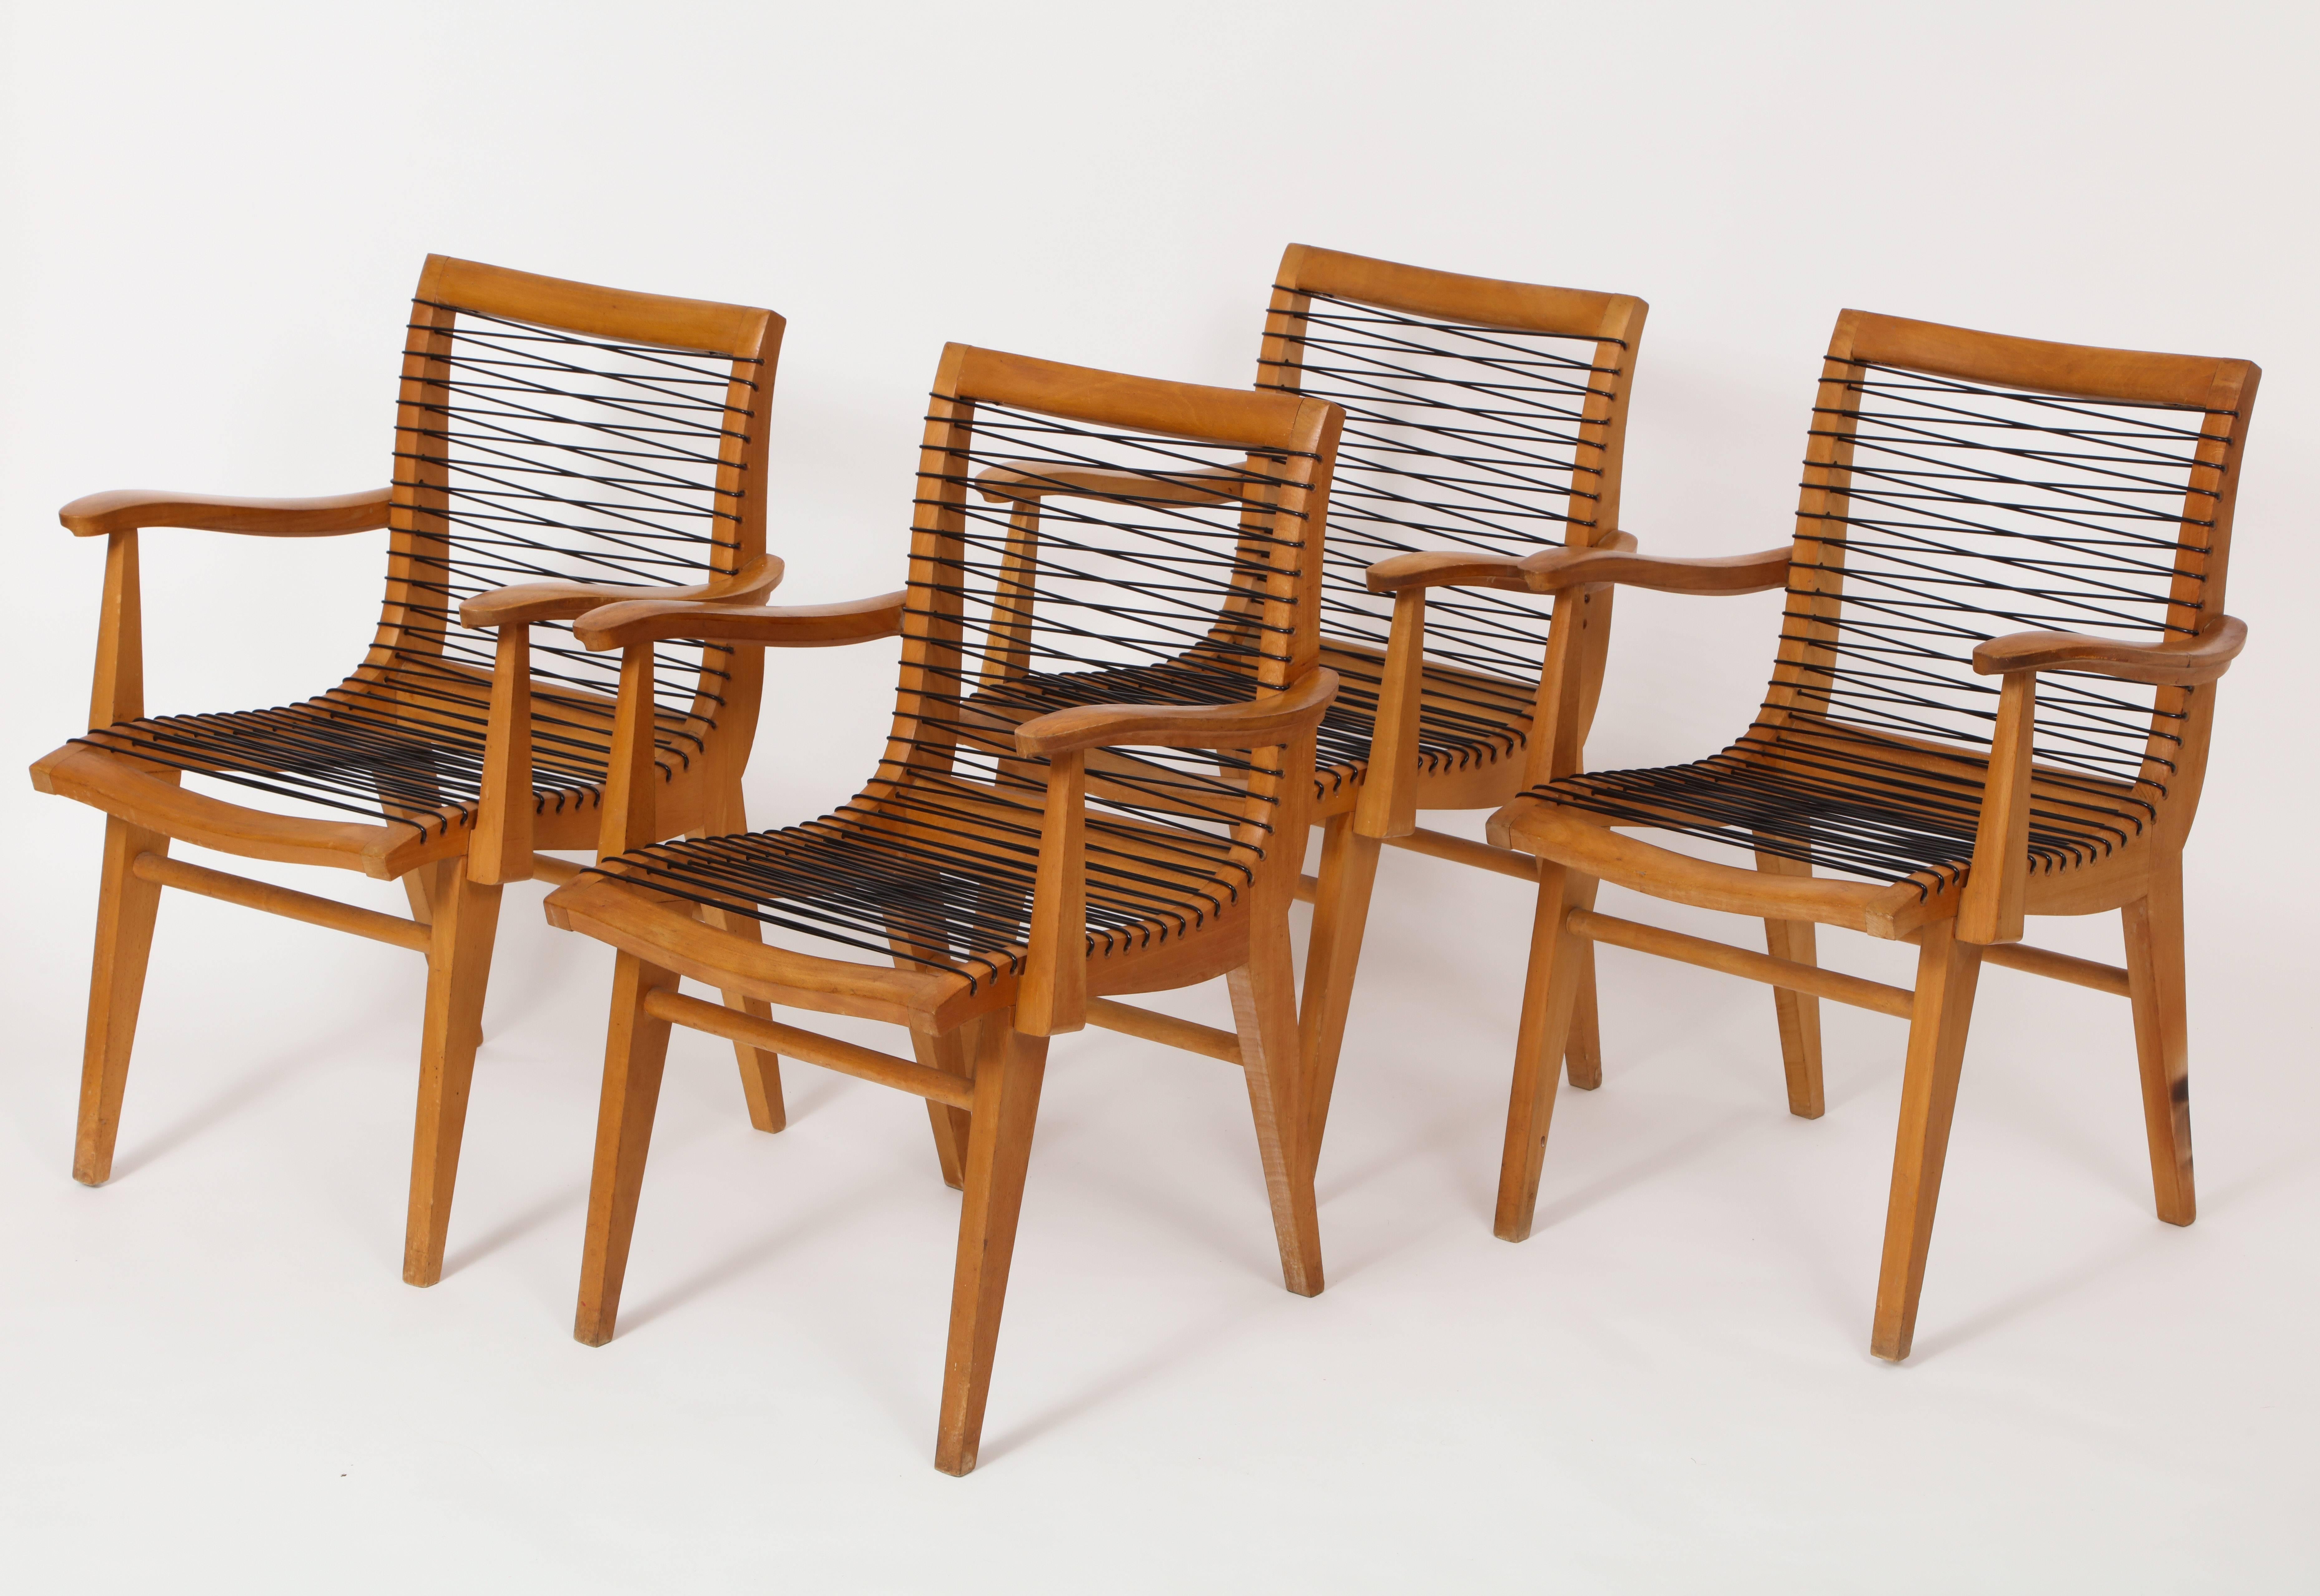 Louis Sognot Sculptural Wood  French Mid Century Dining Office Chairs, 1950s

Louis Sognot chairs architectural and sculptural incredible in any setting.

22 inches diameter
33 inches height
23.23 wide
17.5 seat height
